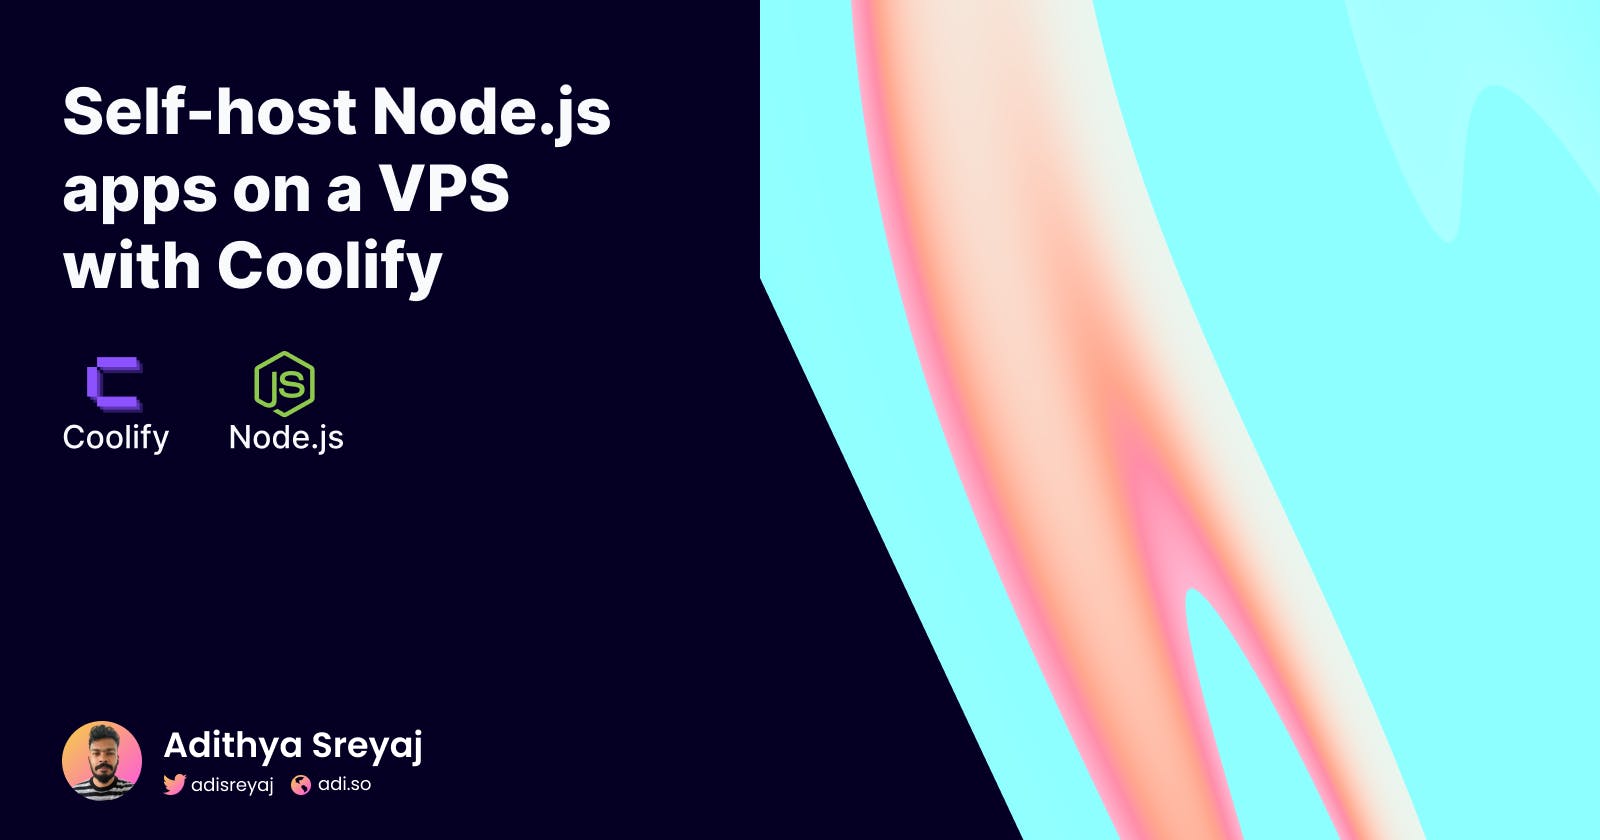 Deploy Node.js applications on a VPS using Coolify